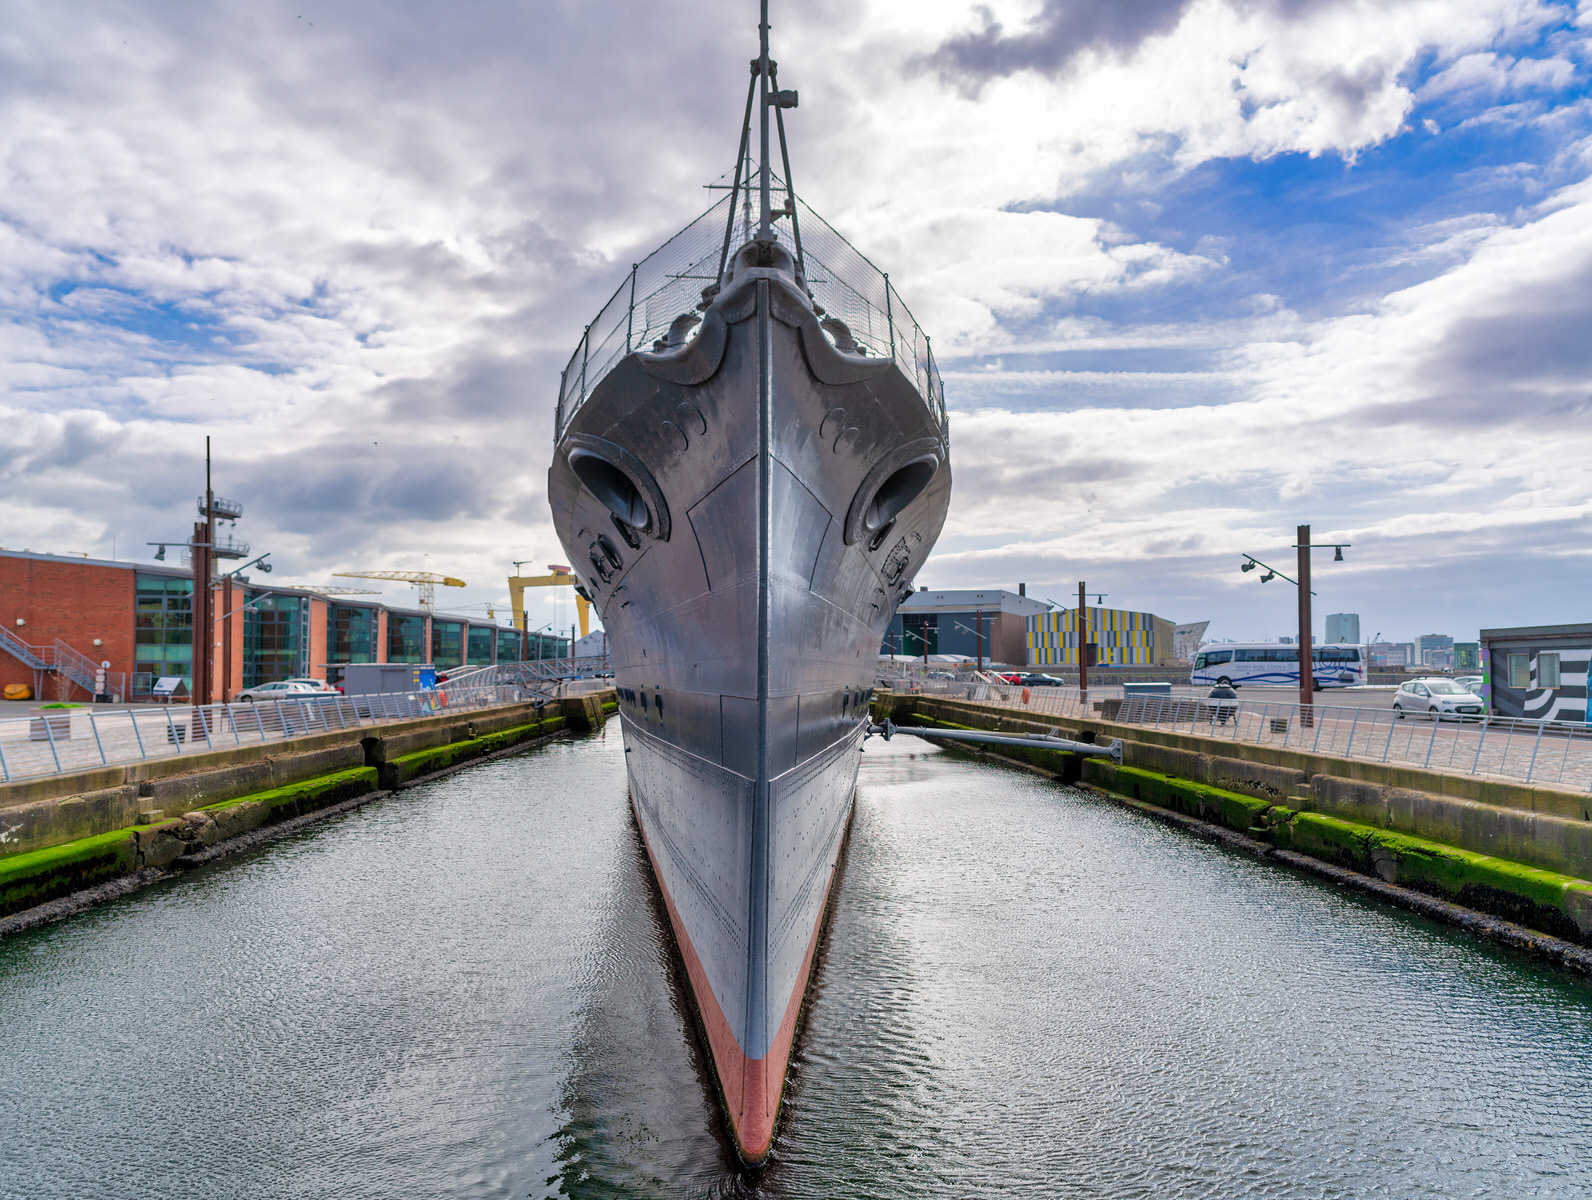 HMS CAROLINE IS AN ATTRACTIVE SHIP [NOW A MUSEUM SHIP AT ALEXANDRA DOCK IN BELFAST]
 002